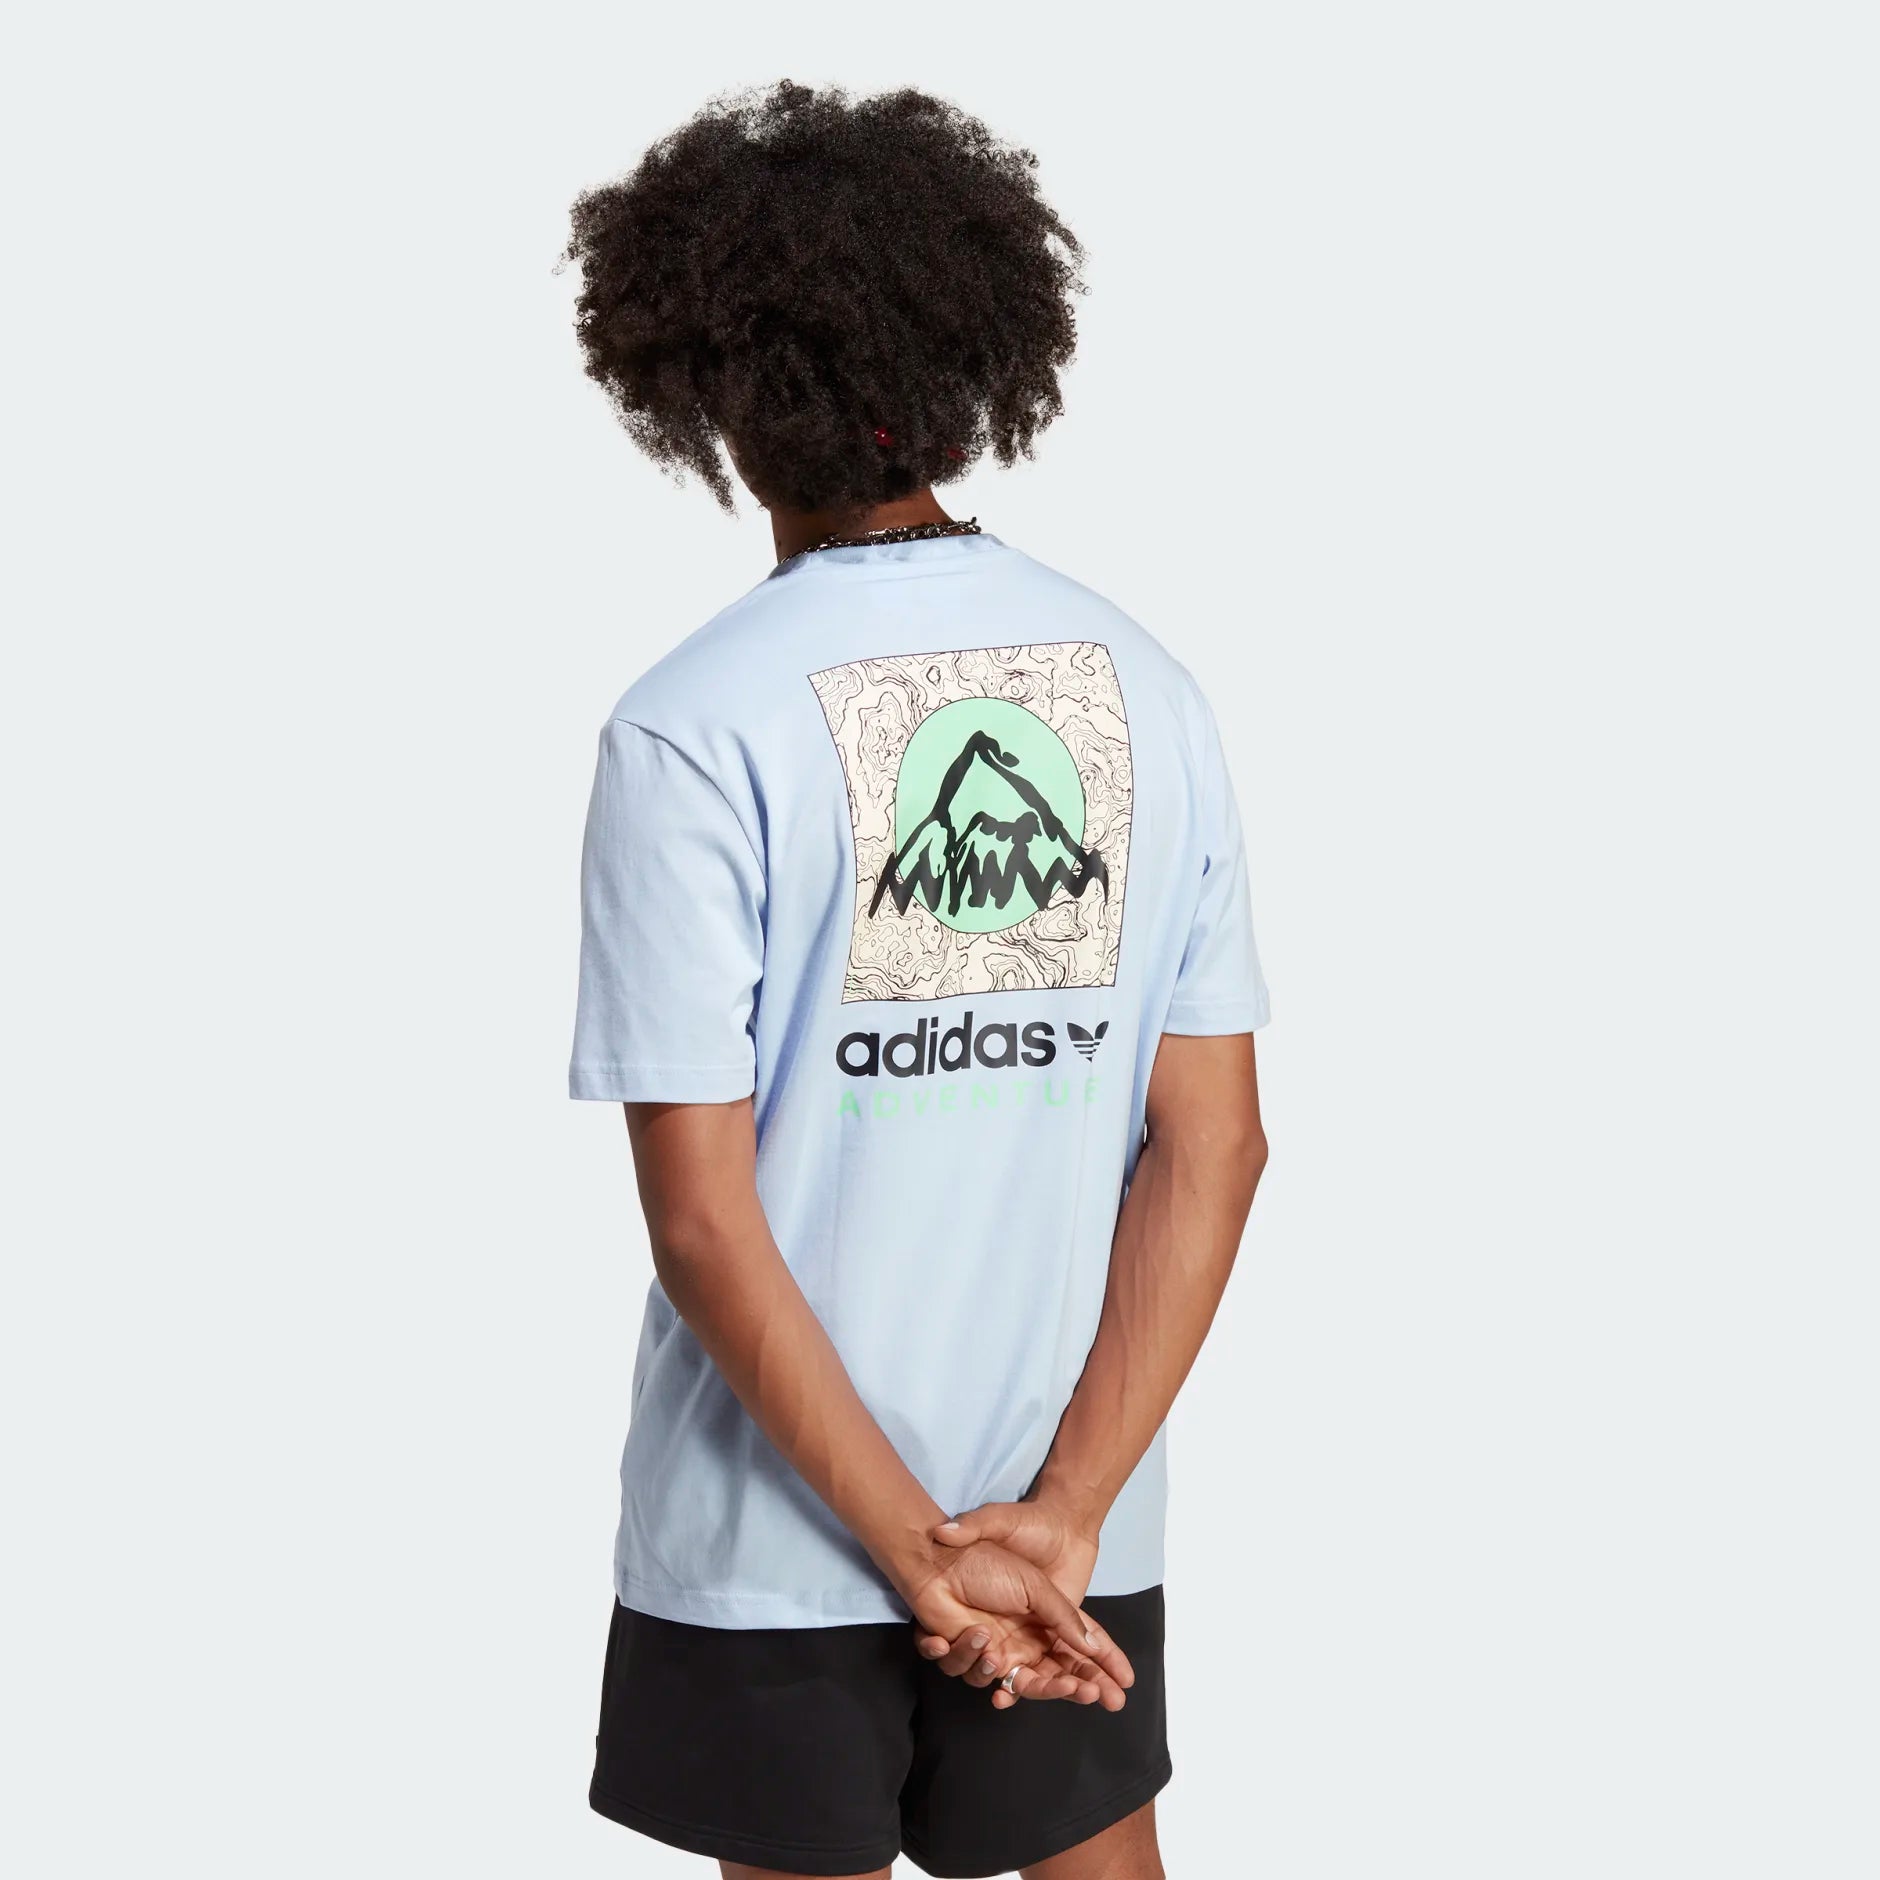 || Your Shop 9 Page – – ADIDAS - bCODE Store CLOTHING MEN - Retail Fashion BCODE Online